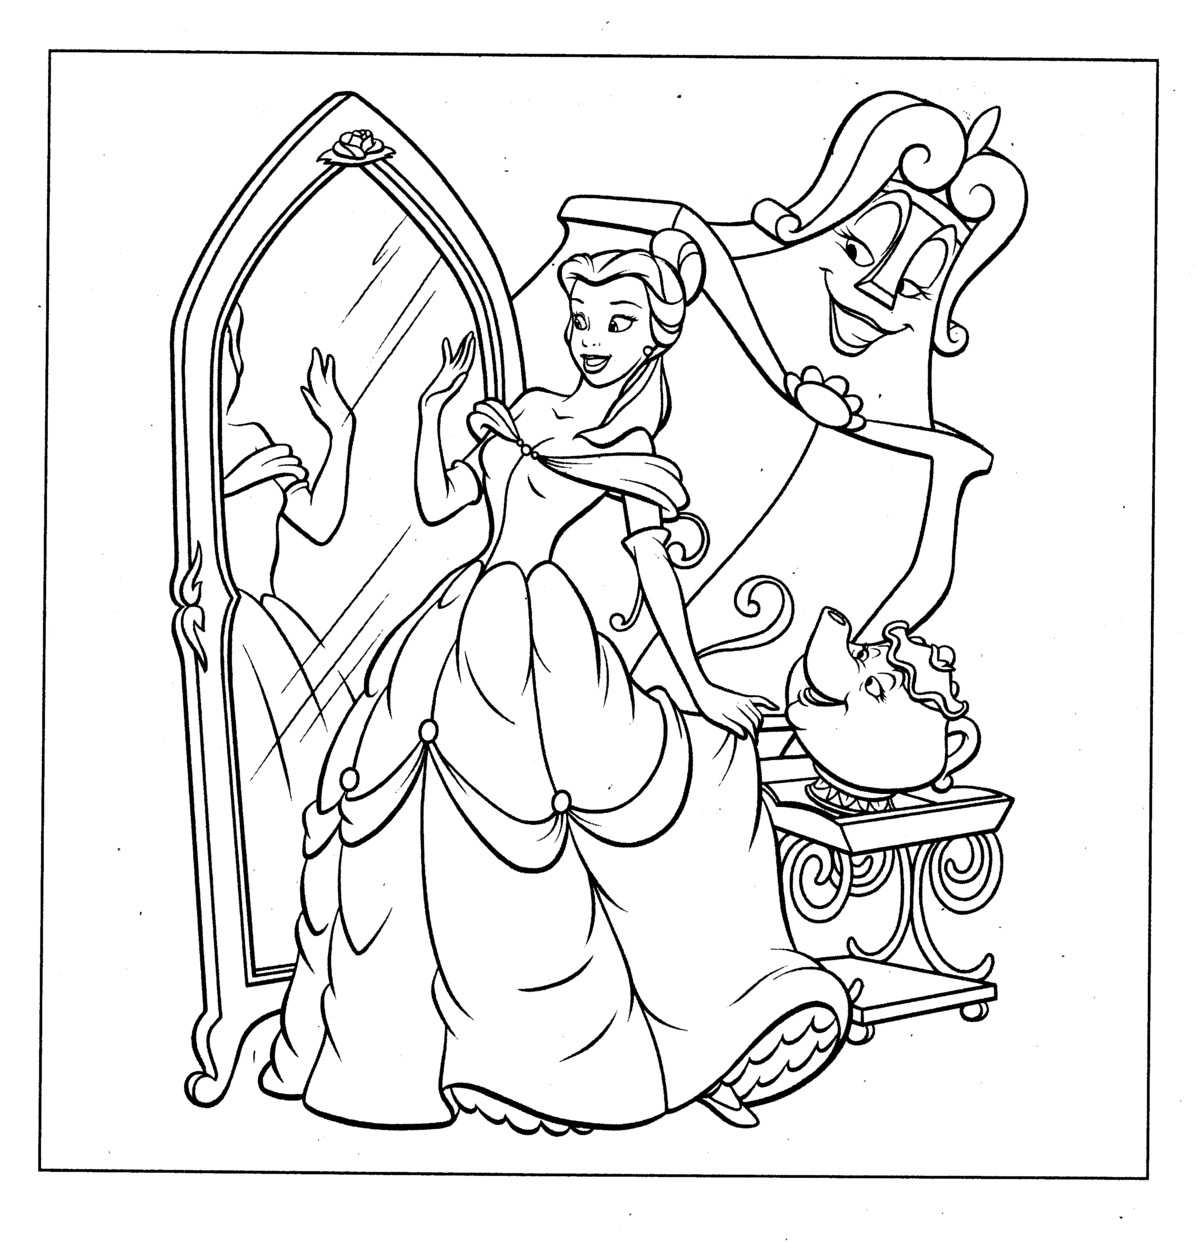 Download Free Printable Disney Princess Coloring Pages For Kids